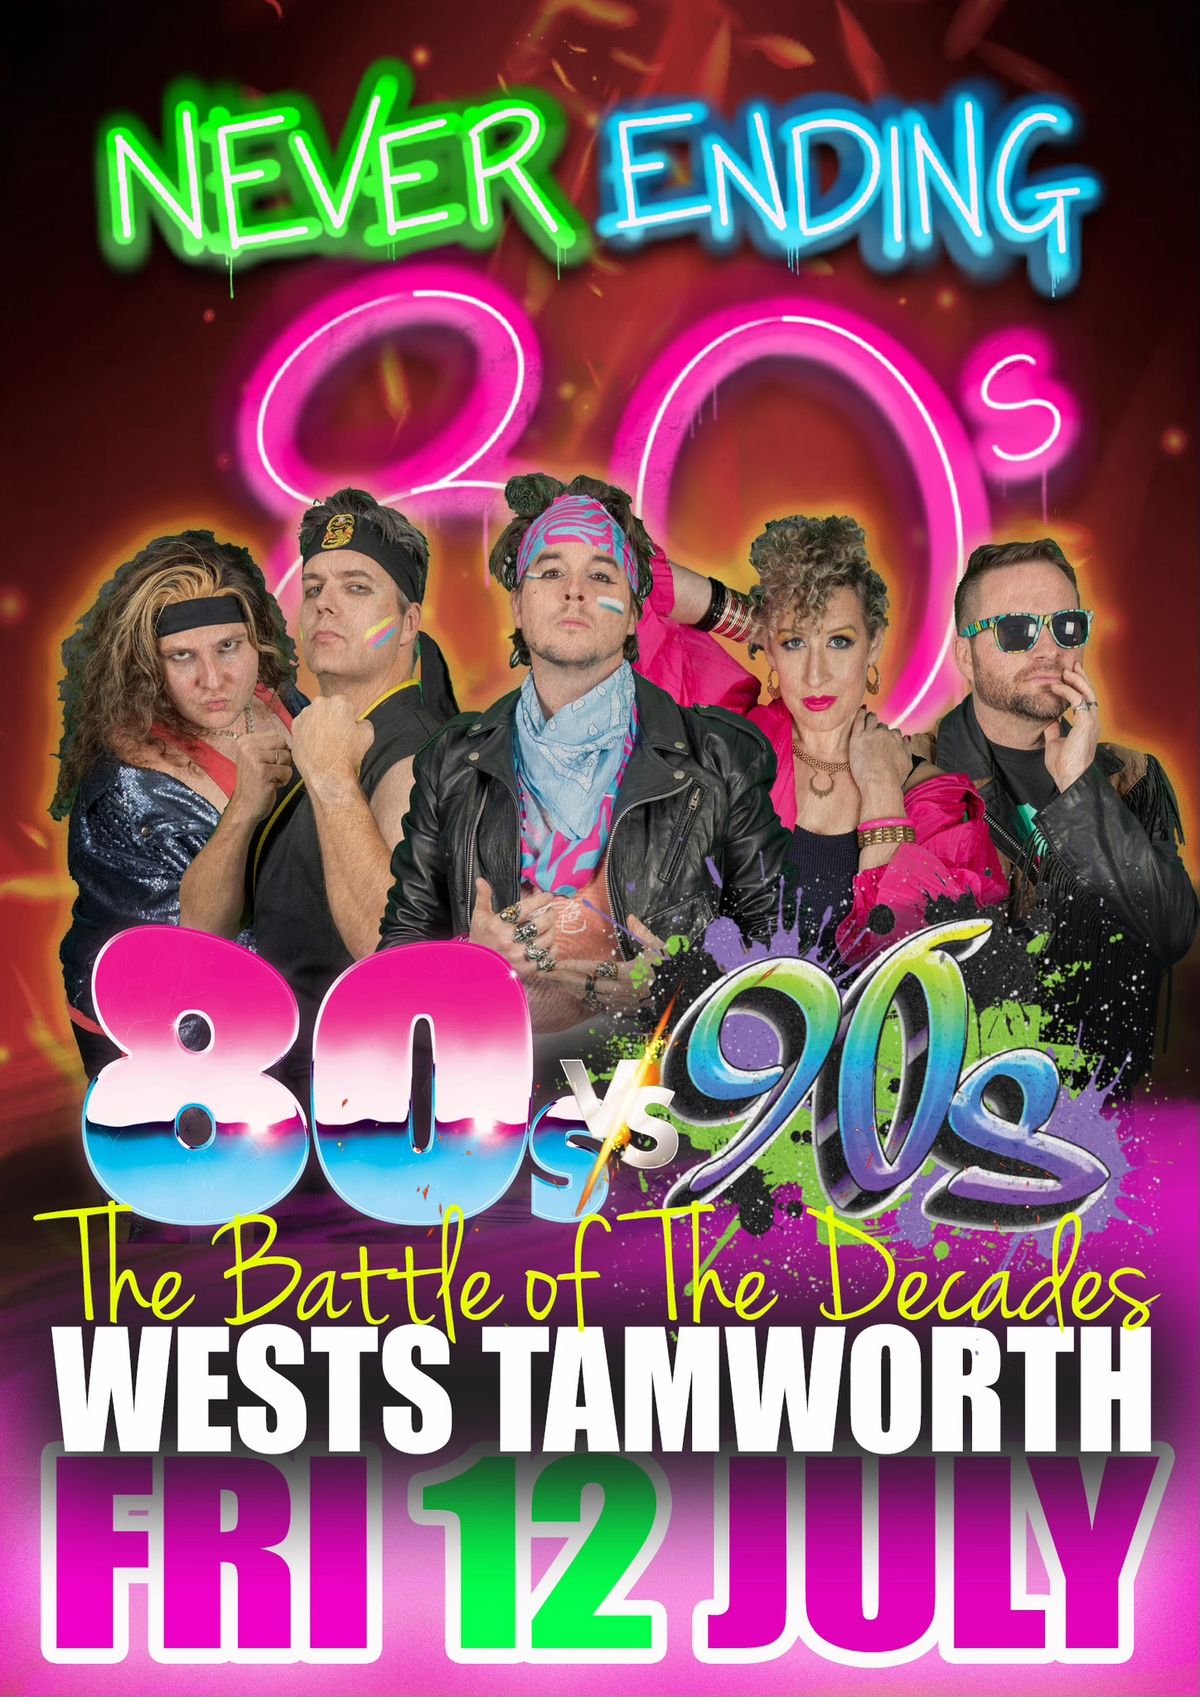 Never Ending 80s v 90s PARTY - Wests Tamworth